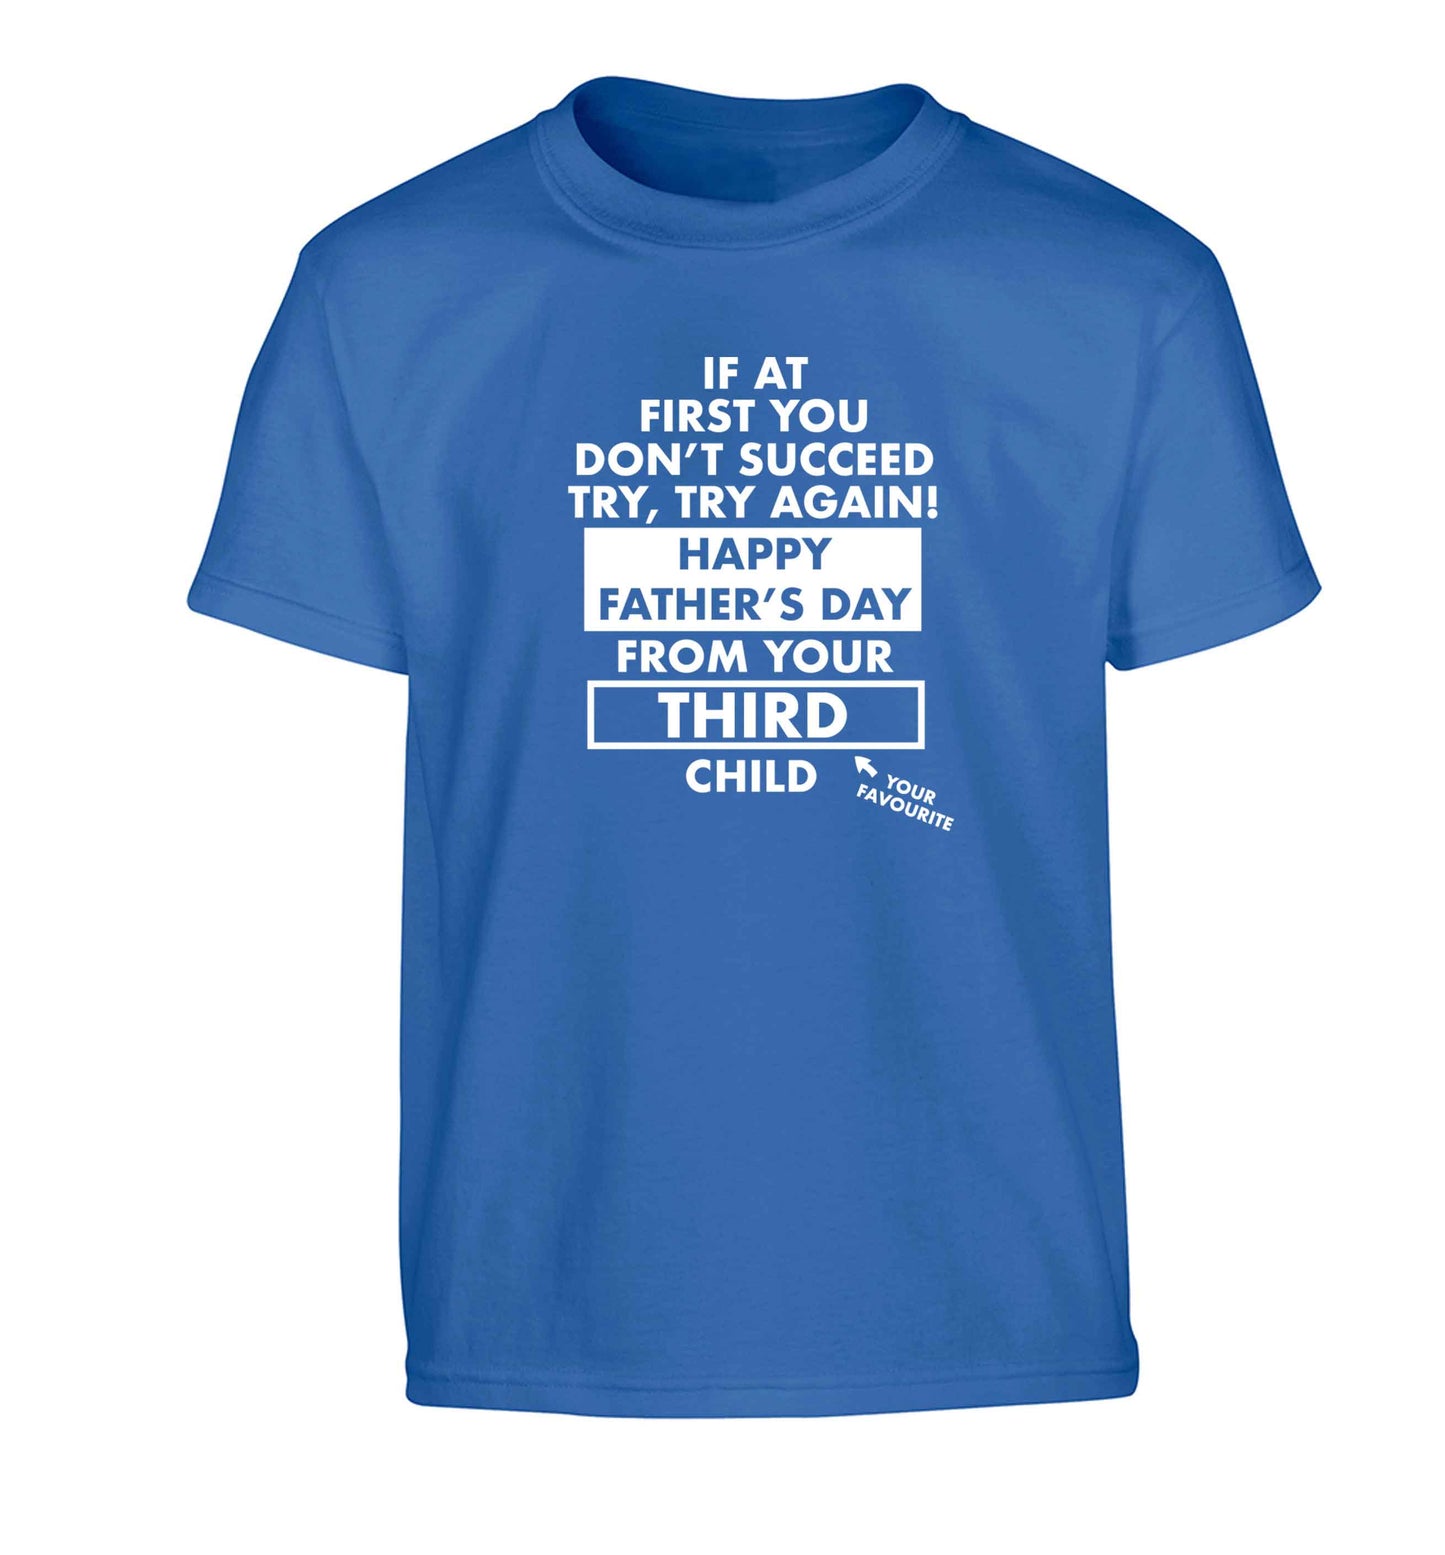 If at first you don't succeed try, try again Happy Father's day from your third child! Children's blue Tshirt 12-13 Years